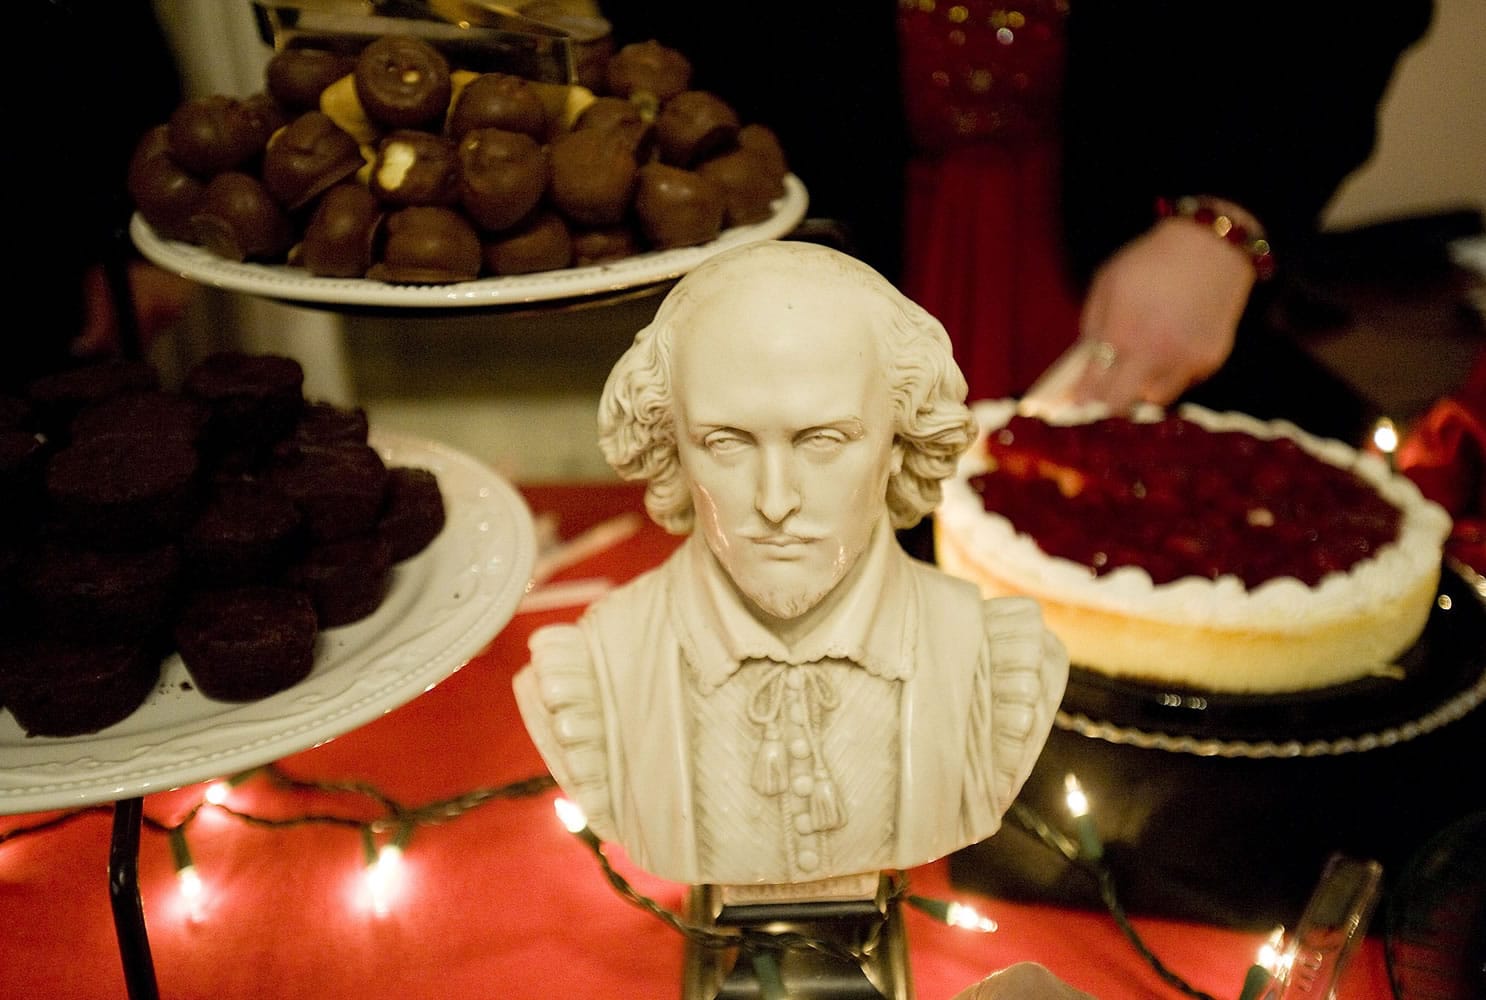 A bust of William Shakespeare sits among the array of treats laid out Saturday at the Slocum House Theatre Company's final annual gala.